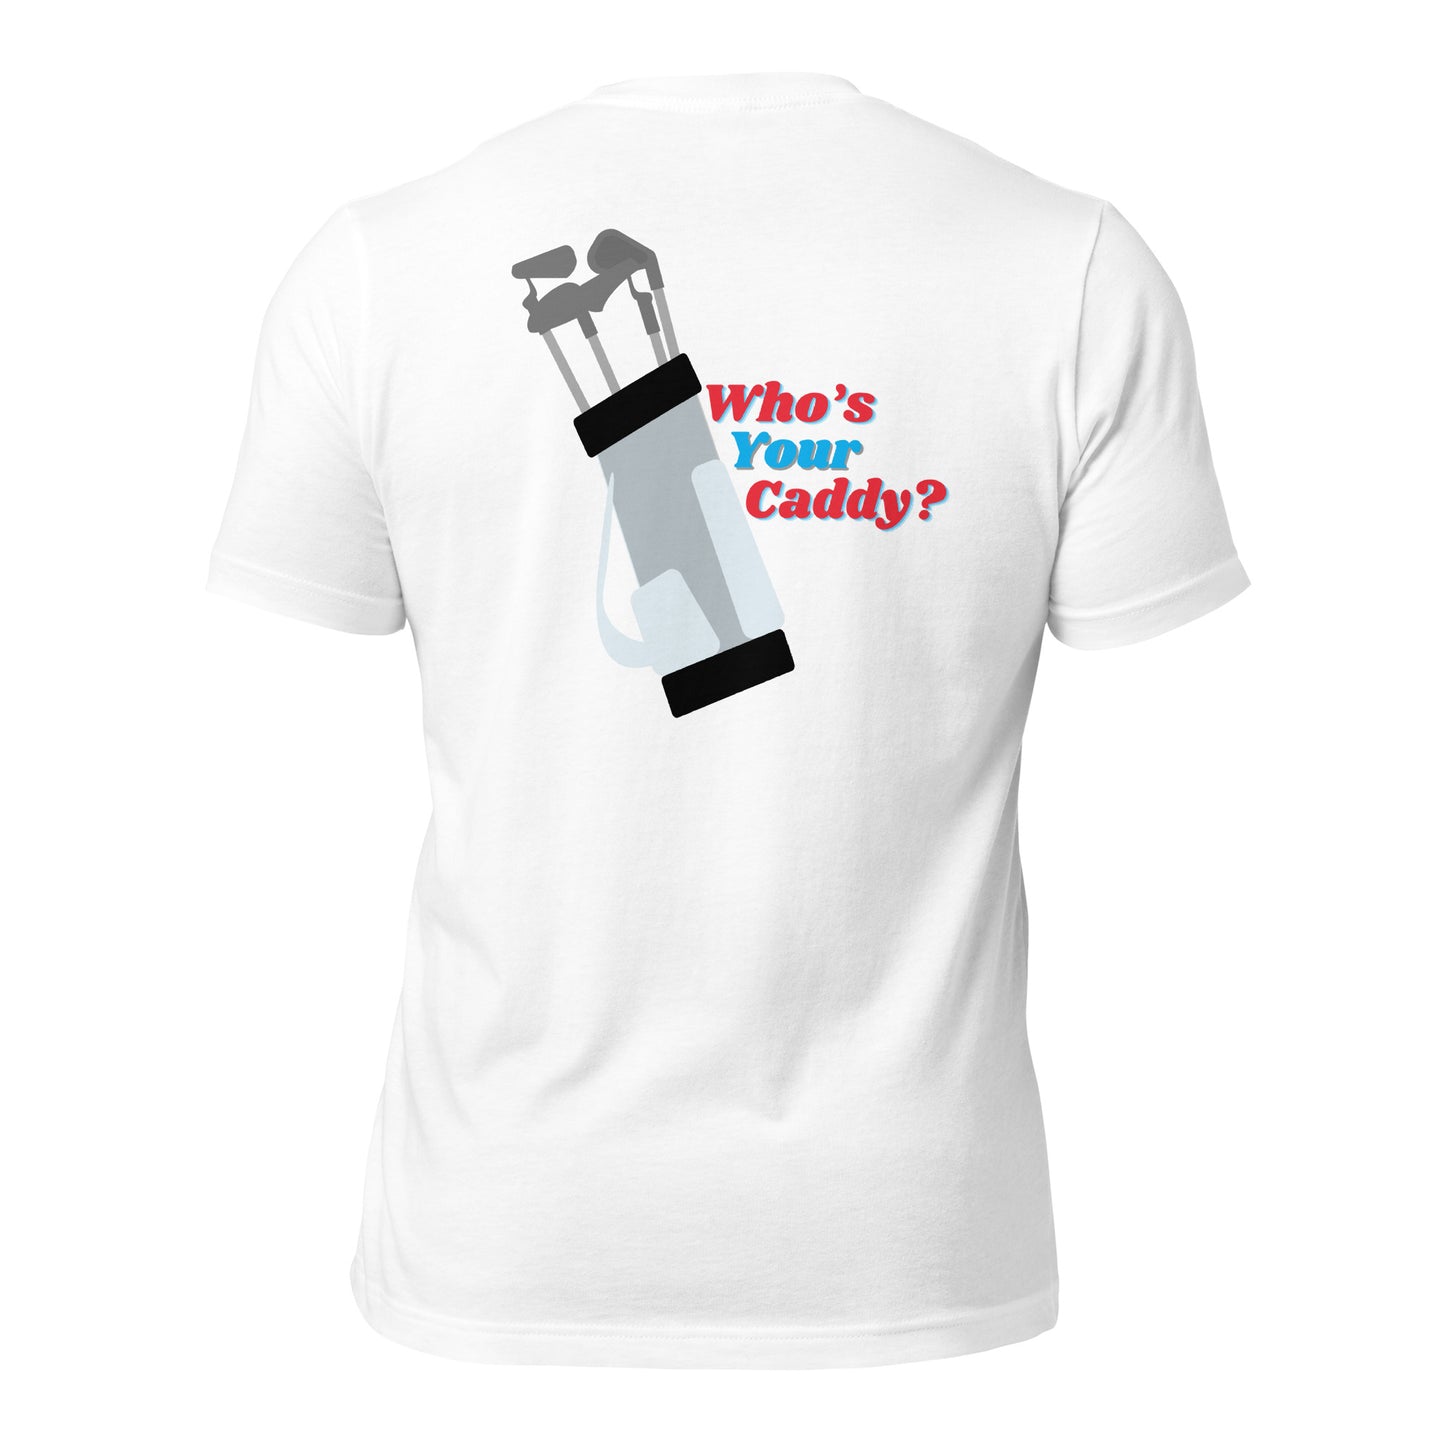 Who's Your Caddy Tee Shirt